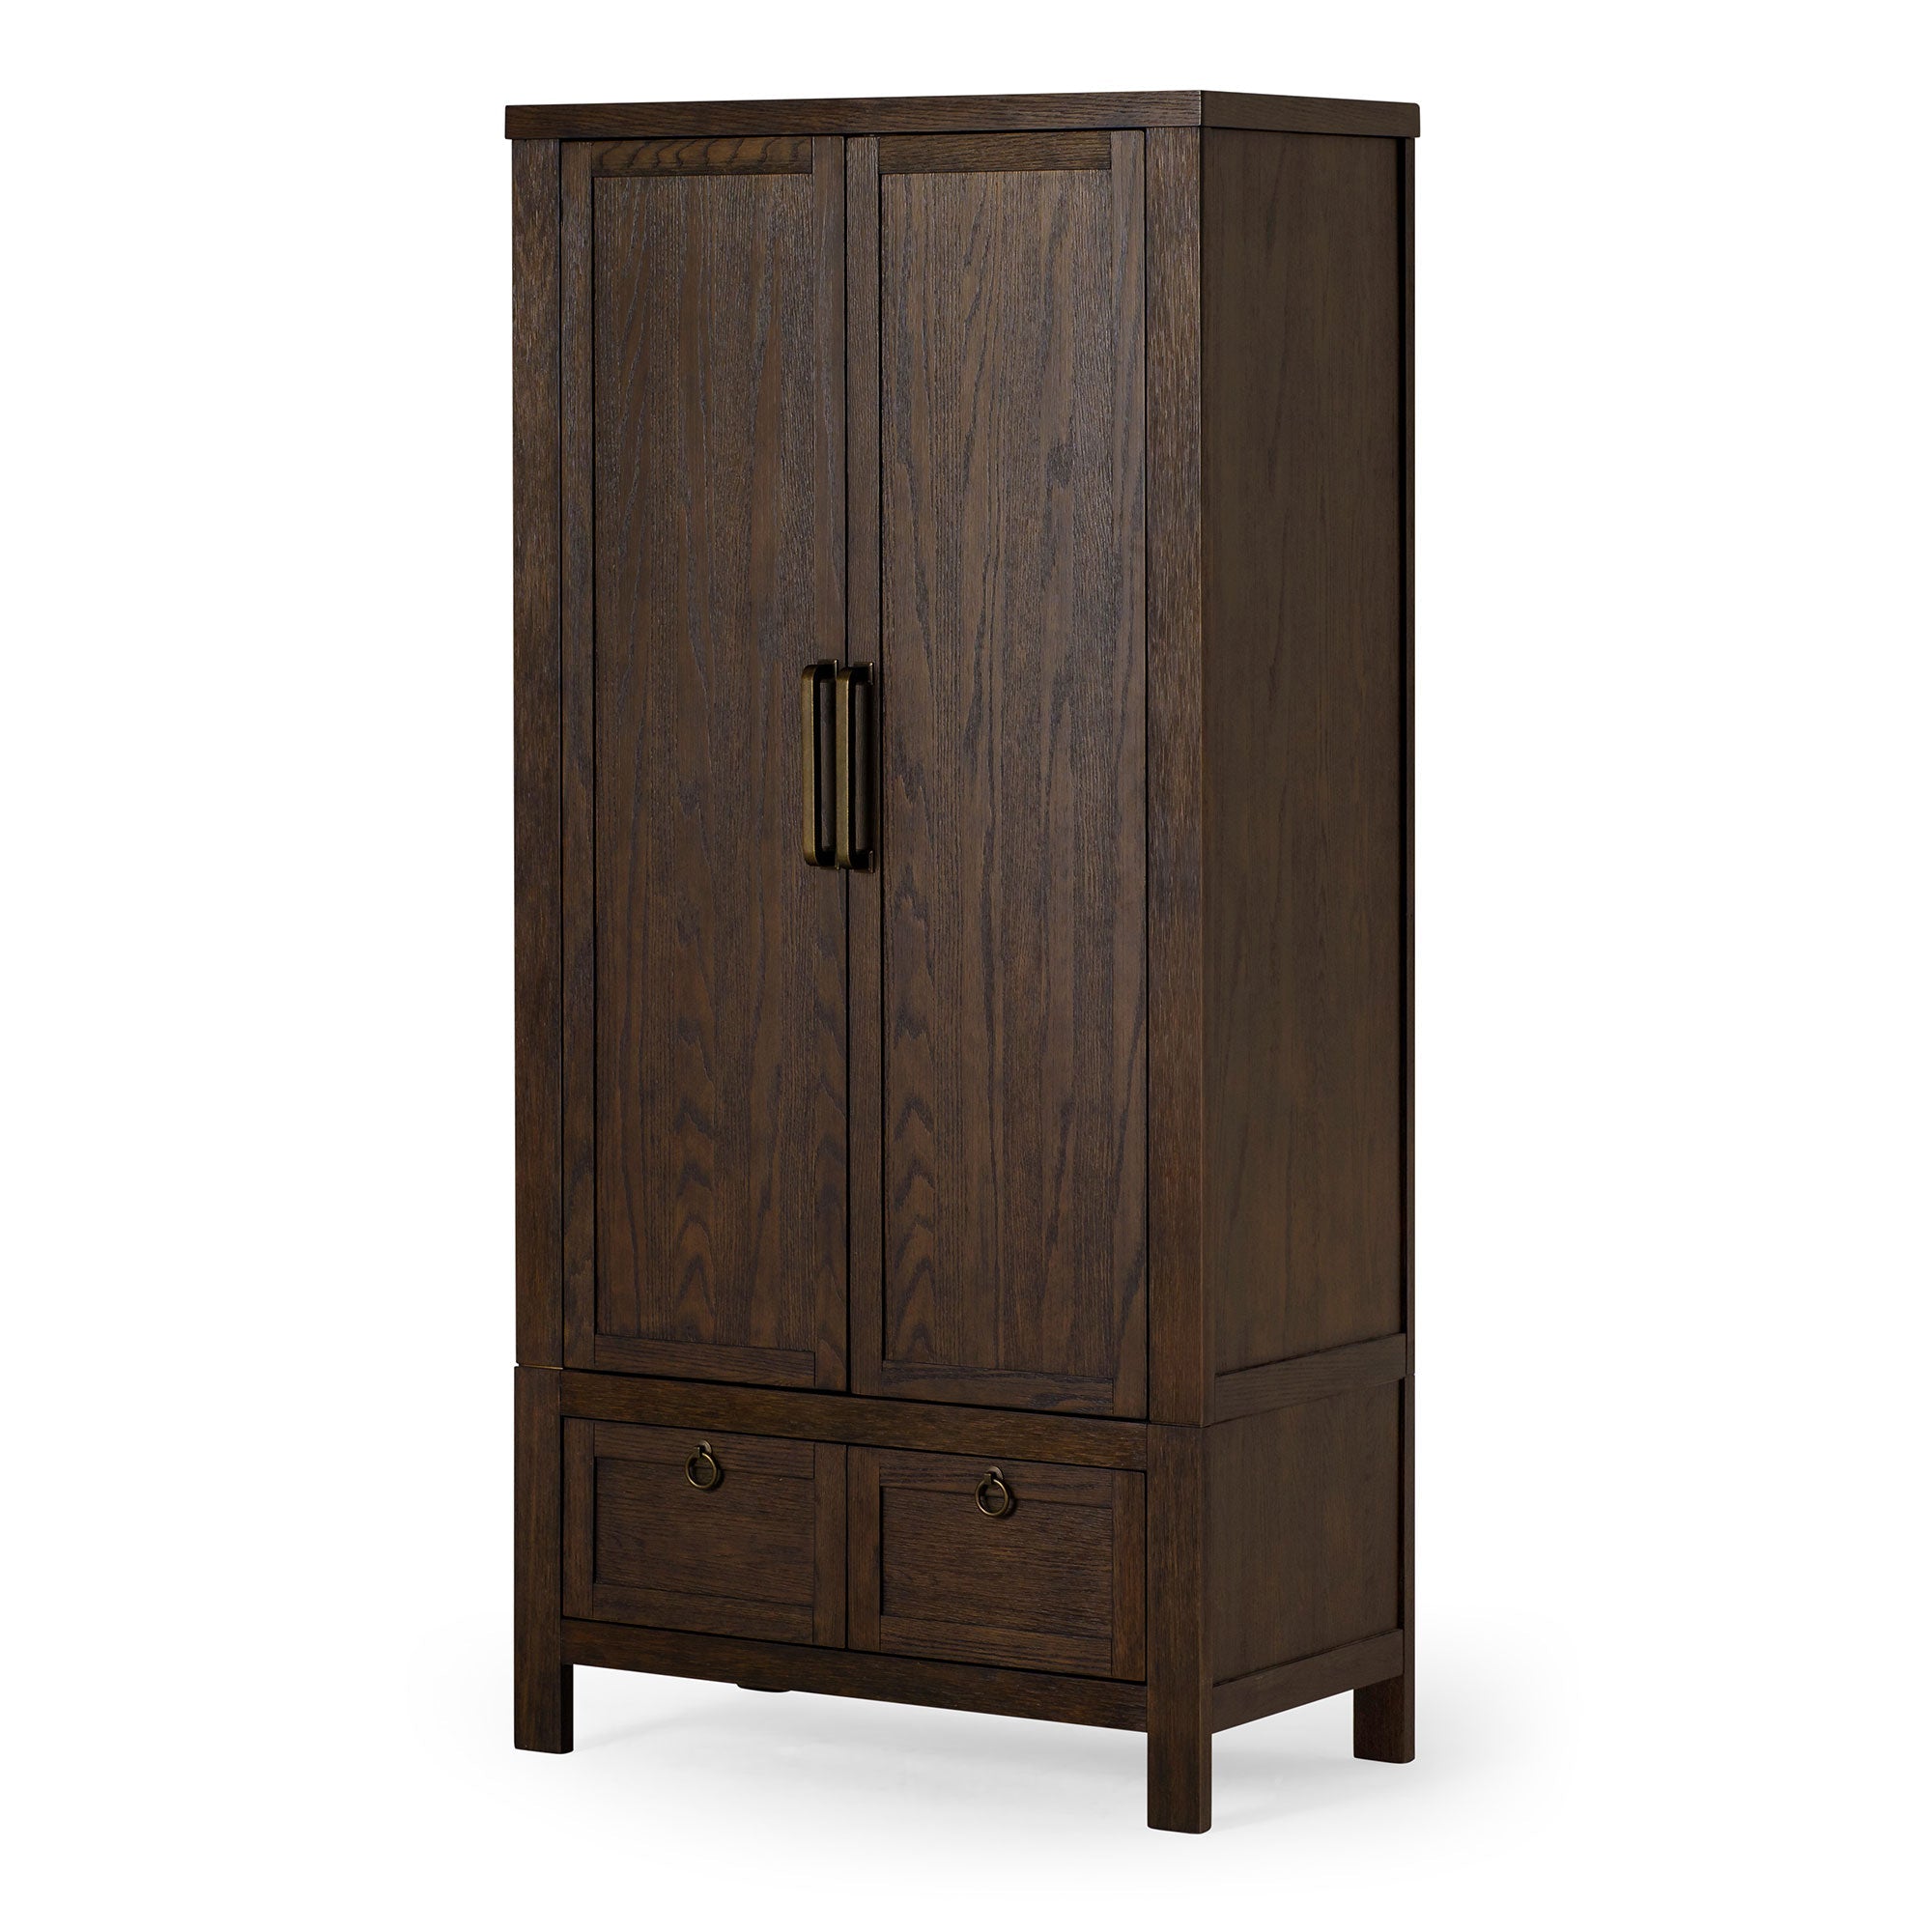 Maven-Lane-Vaughn-Rustic-Wooden-Cabinet-in-Weathered-Brown-Finish-China-Cabinets-&-Hutches